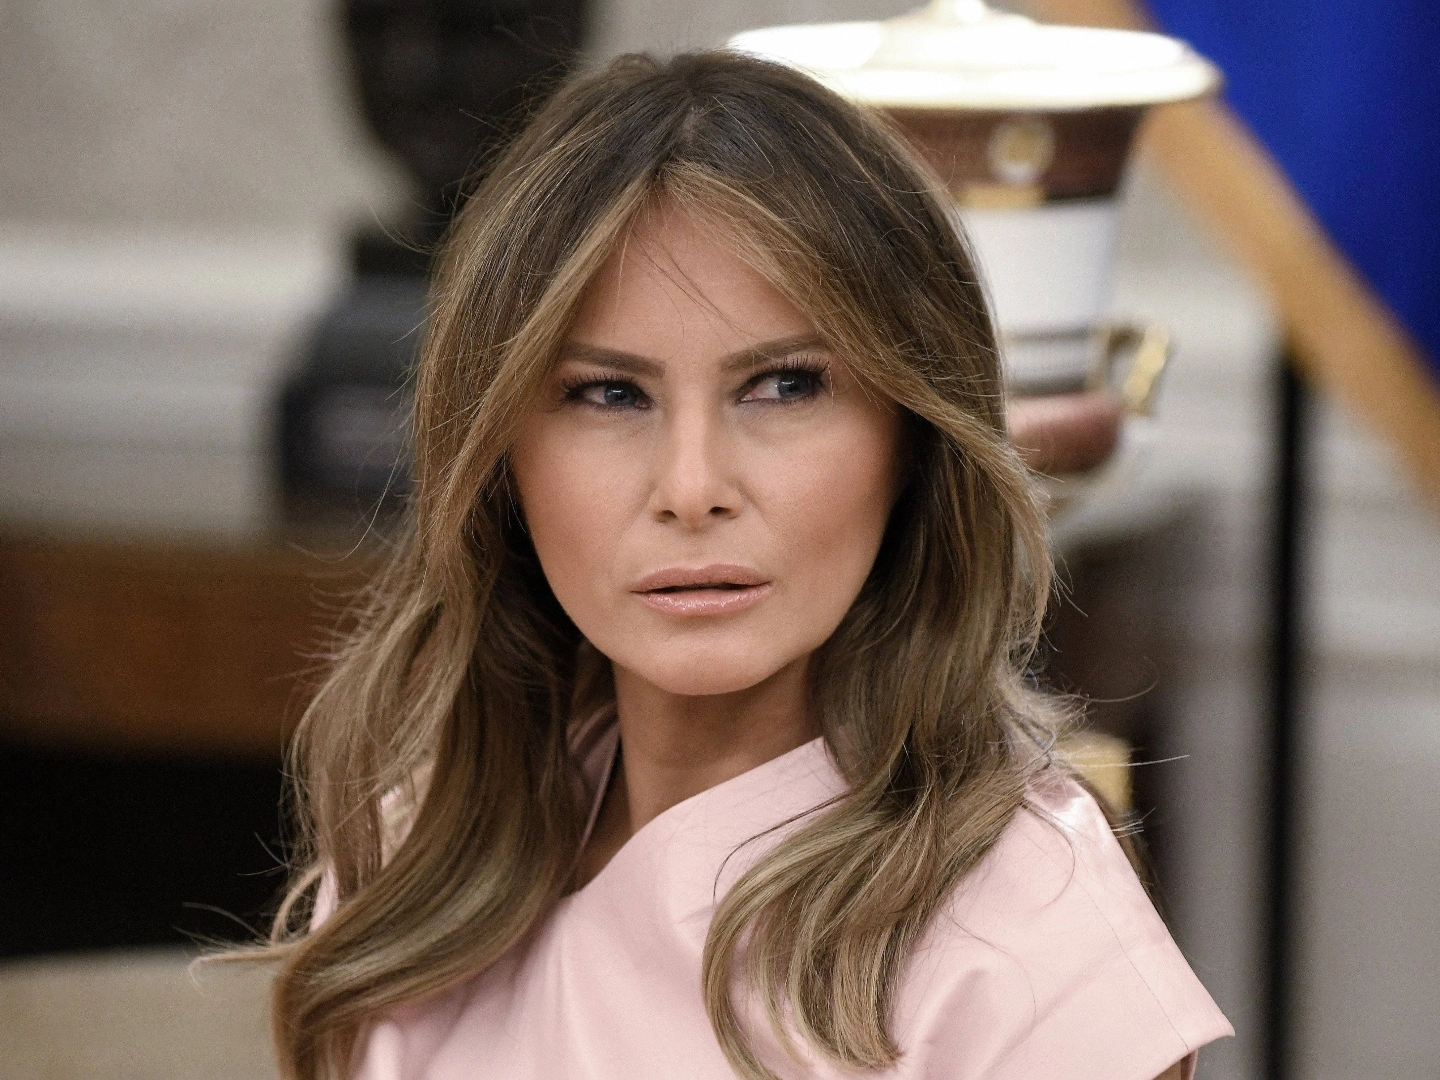 ”melania-trump-tells-she-has-more-useful-things-to-do-than-pose-for-vogue”